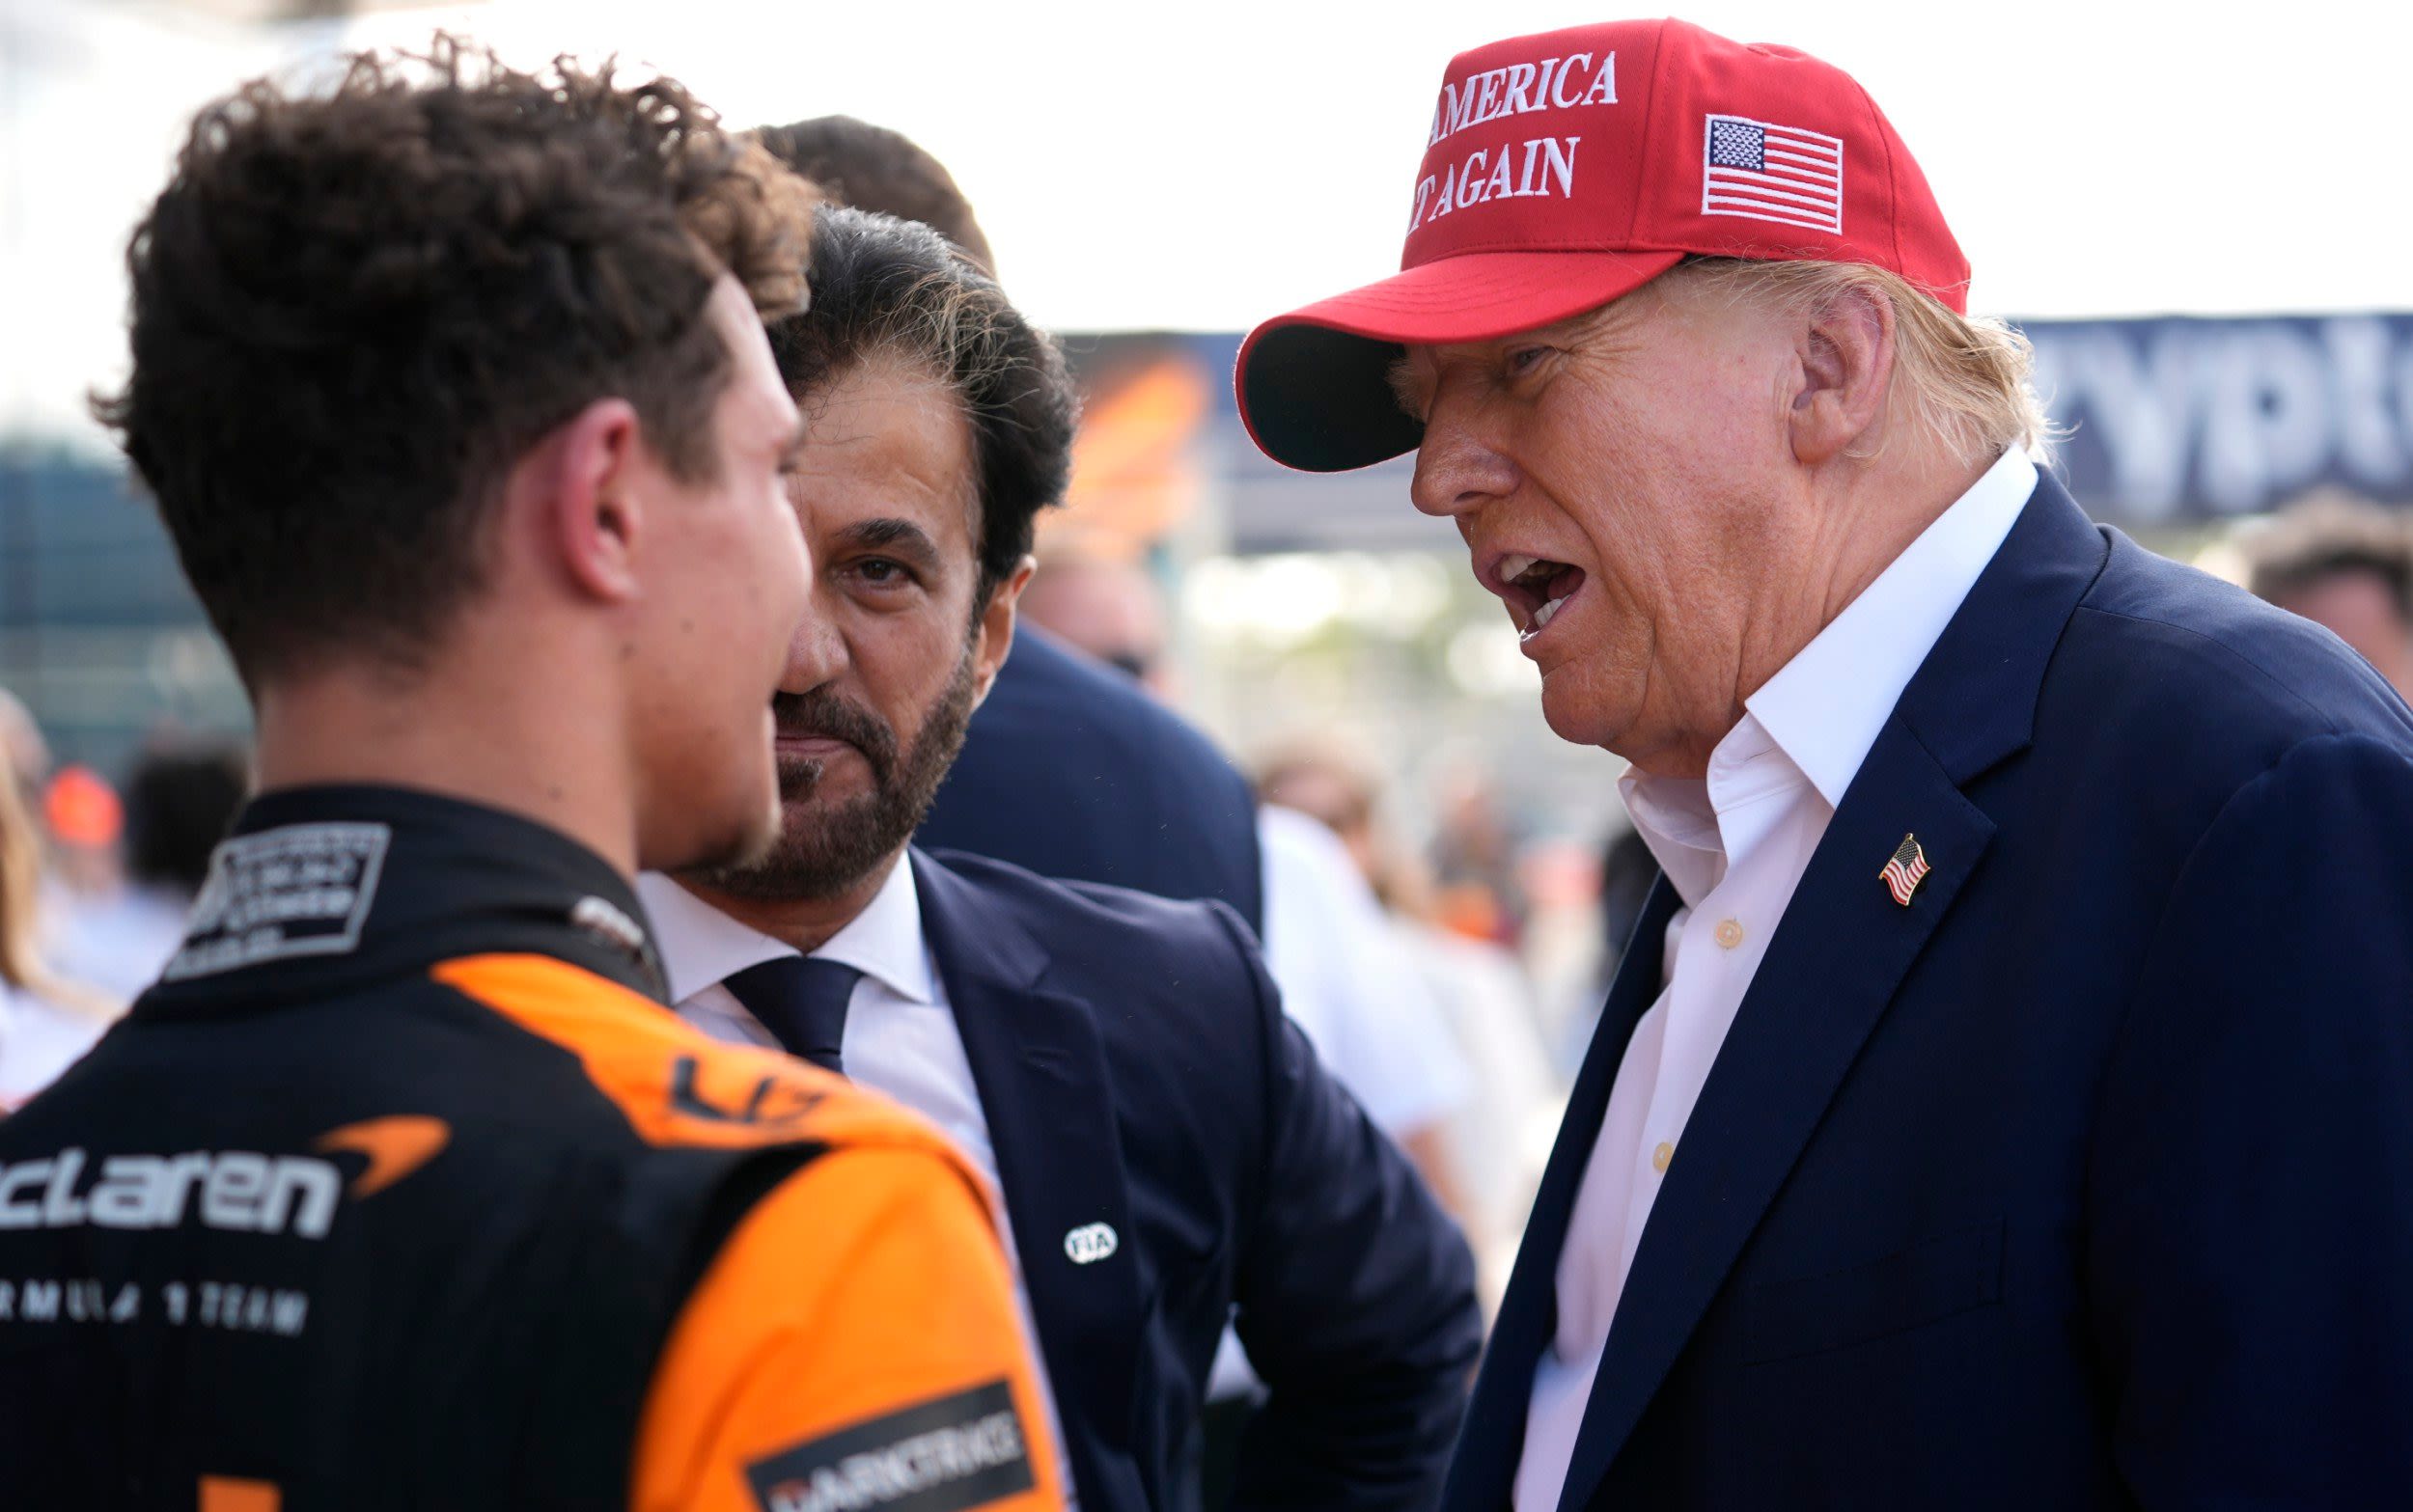 Trump told Lando Norris he was his ‘lucky charm’ in congratulatory chat